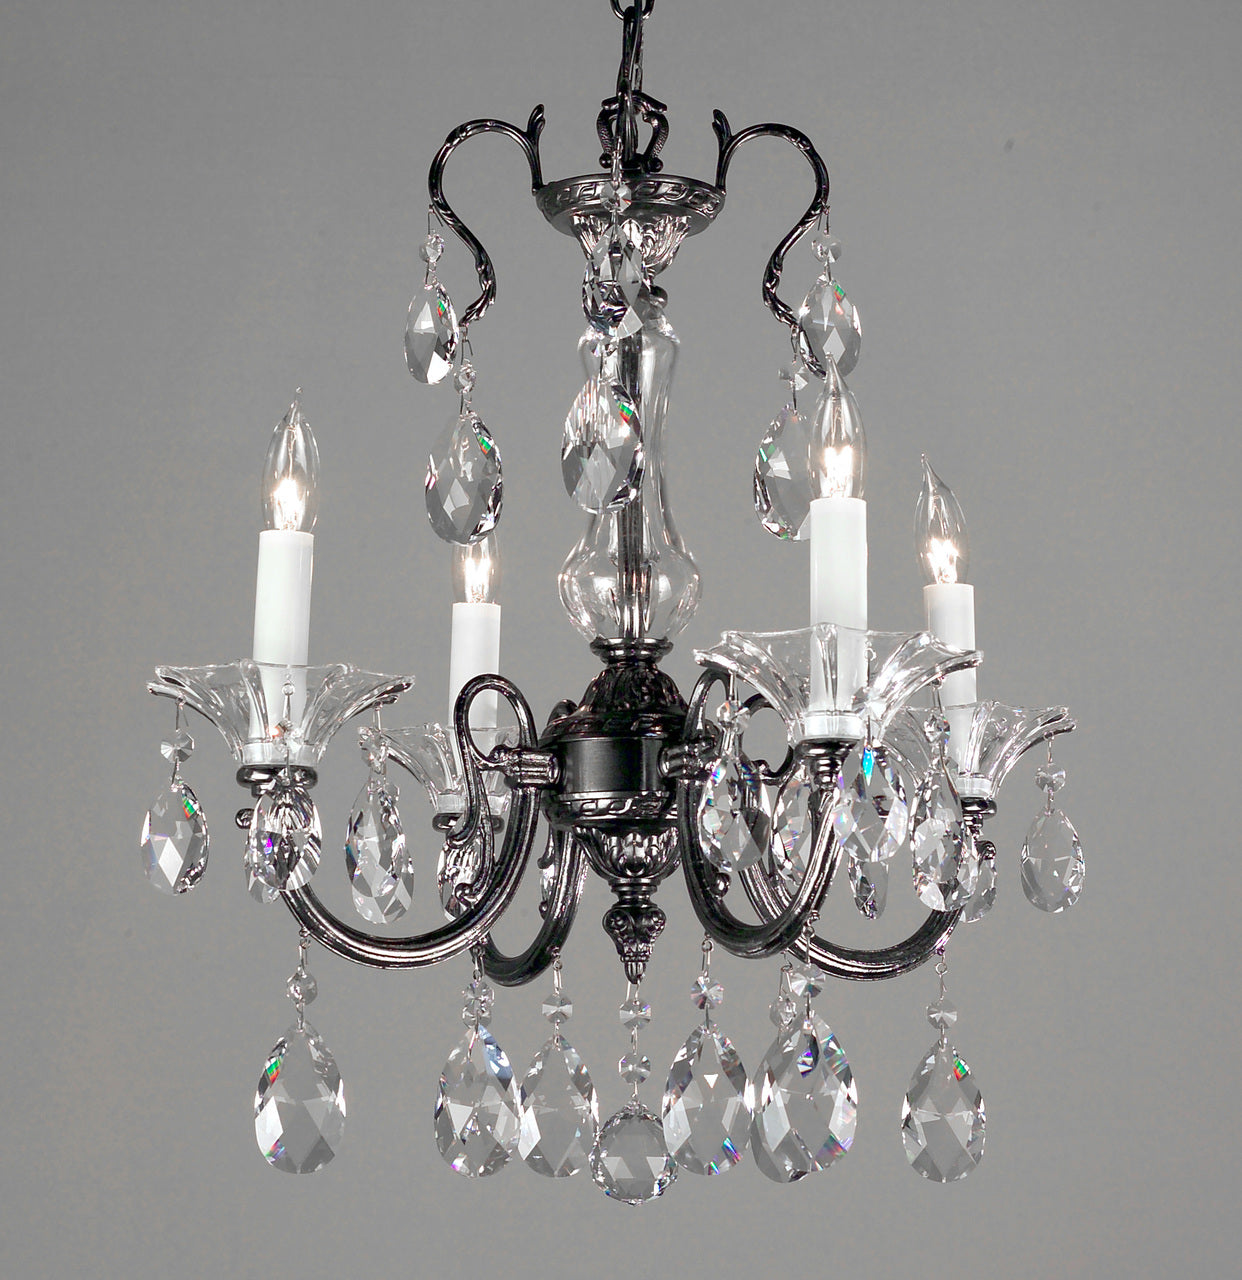 Classic Lighting 57054 EP S Via Lombardi Crystal Mini Chandelier in Ebony Pearl (Imported from Spain)